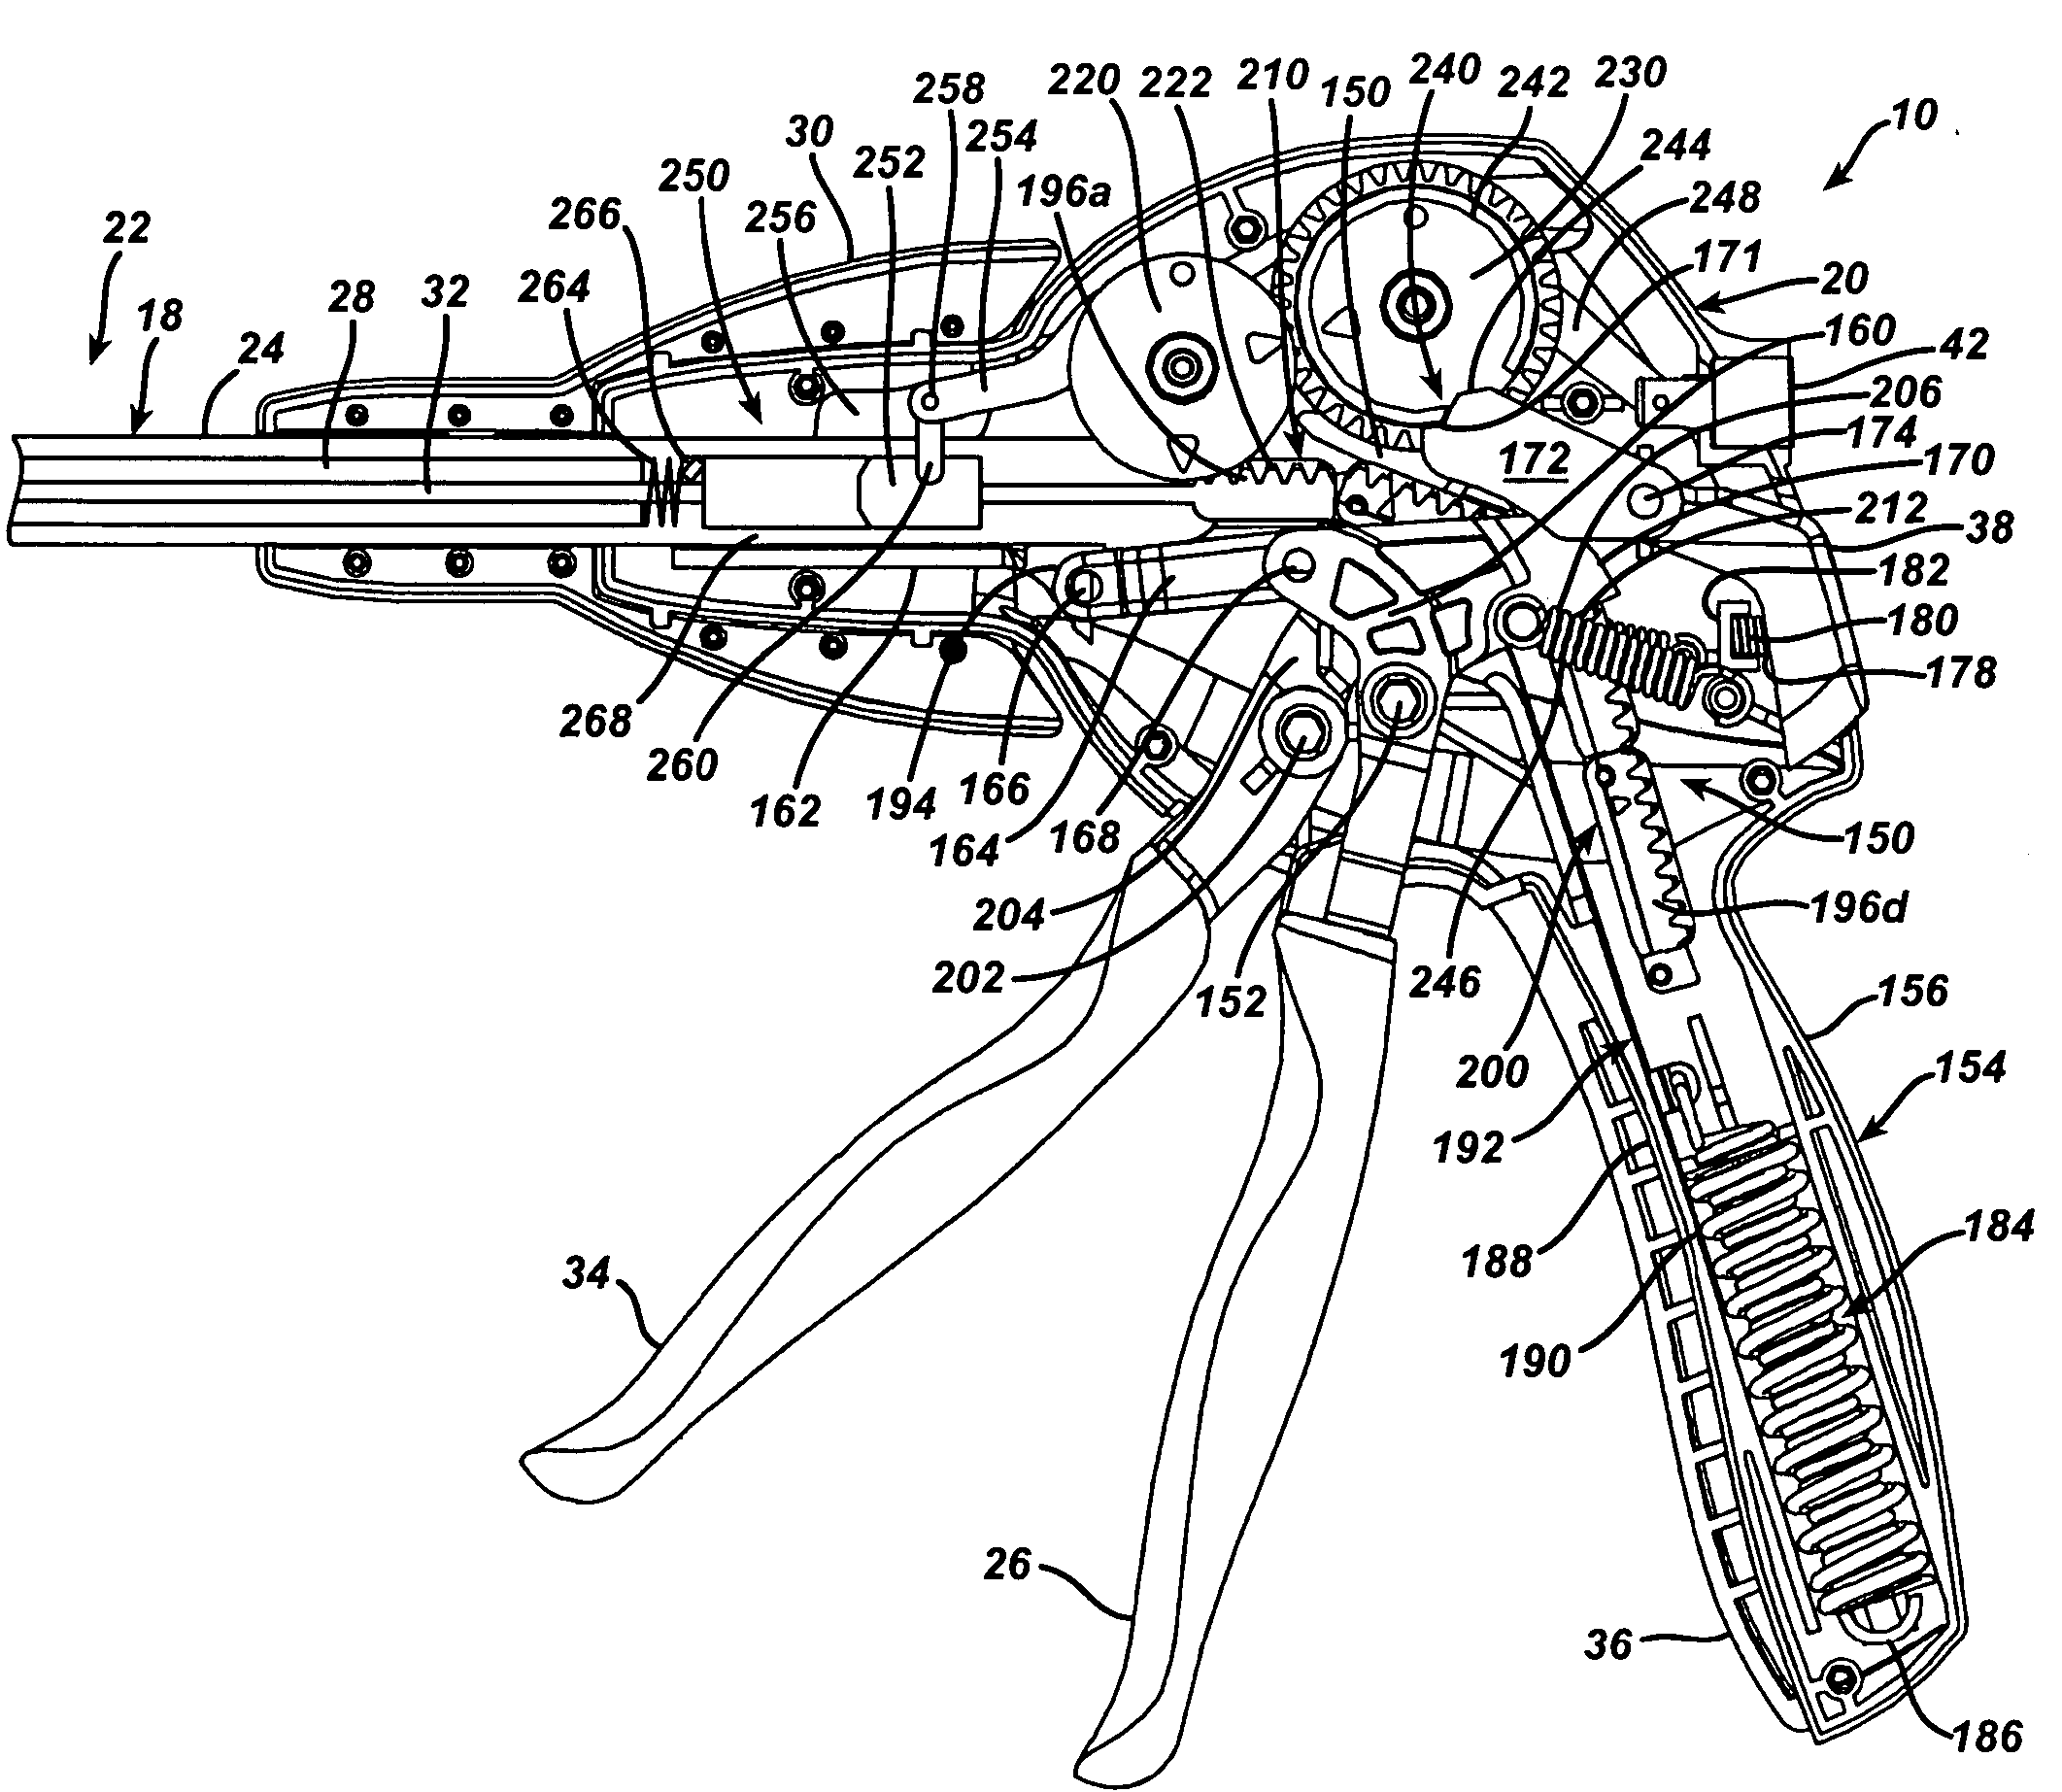 Surgical stapling instrument with multistroke firing incorporating an anti-backup mechanism